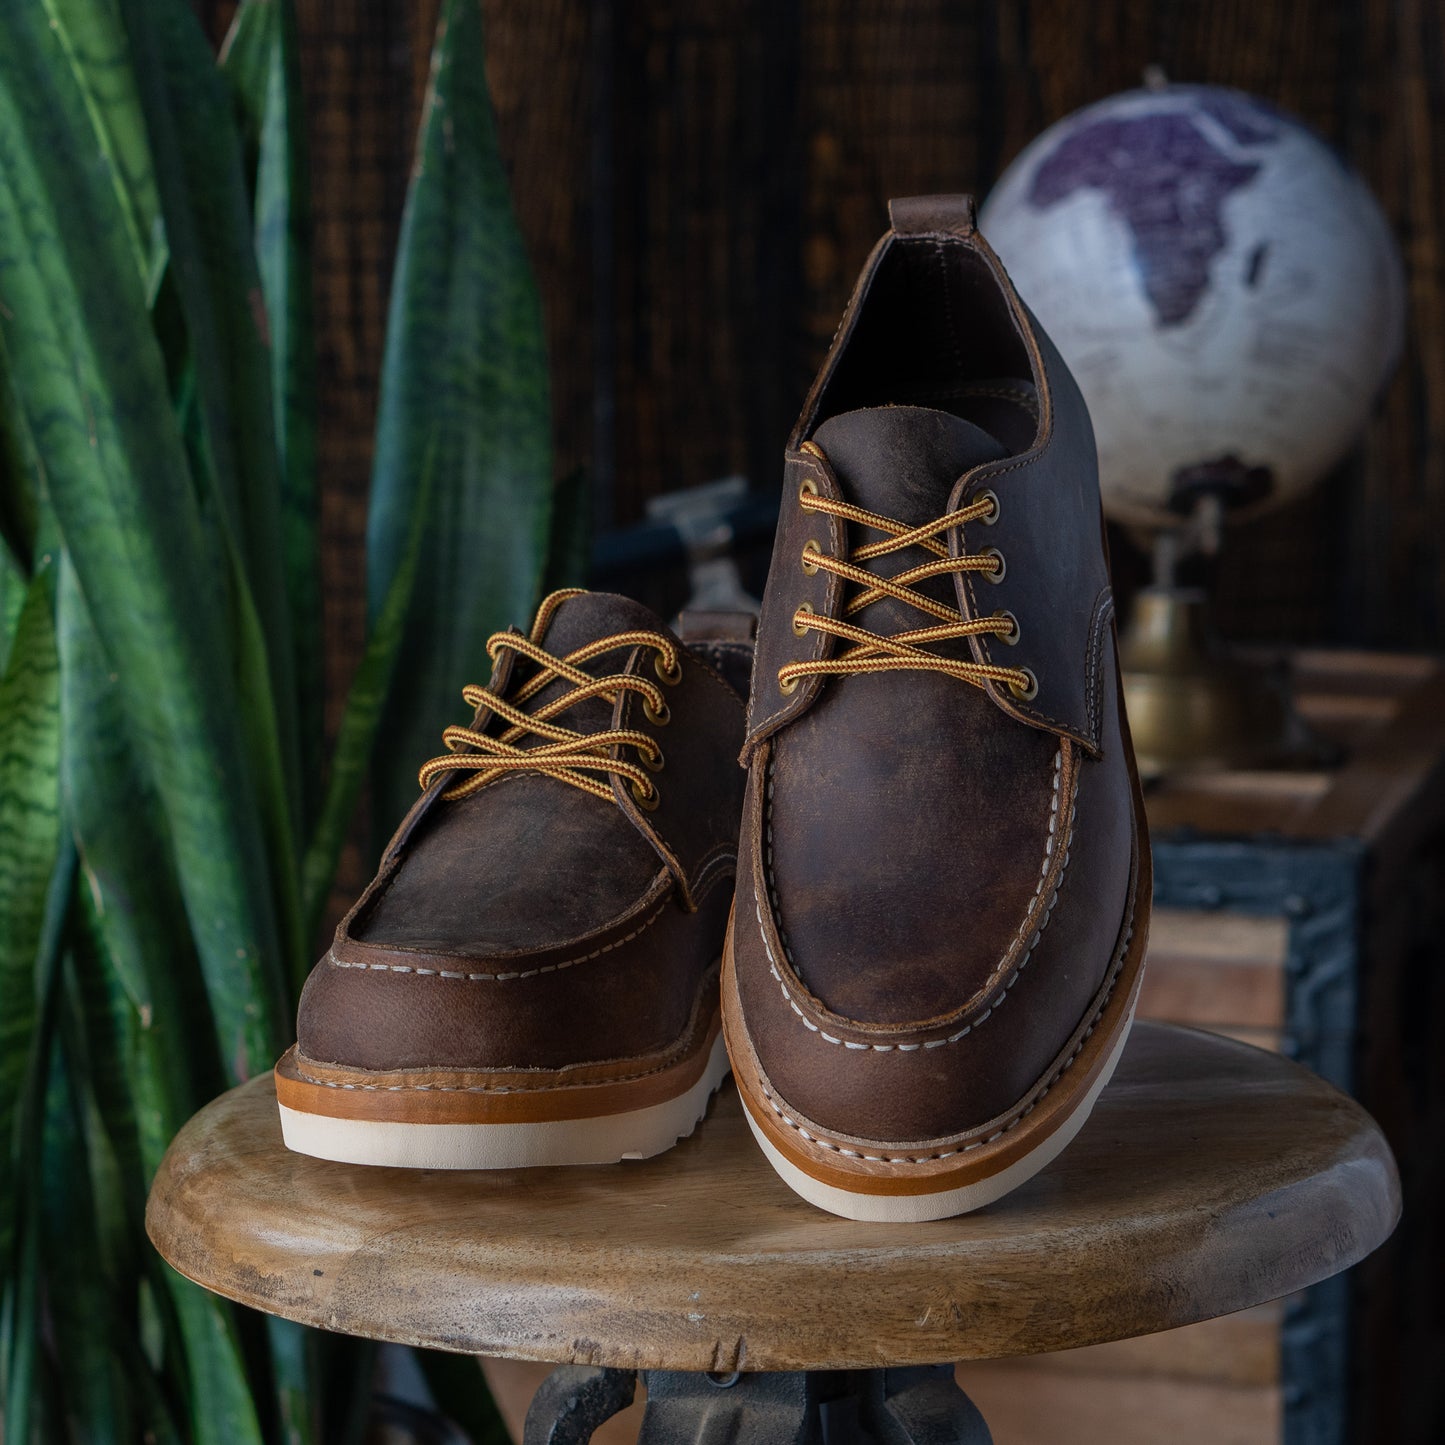 Chaussures Moc-Toe (marron vintage) Goodyear Welted